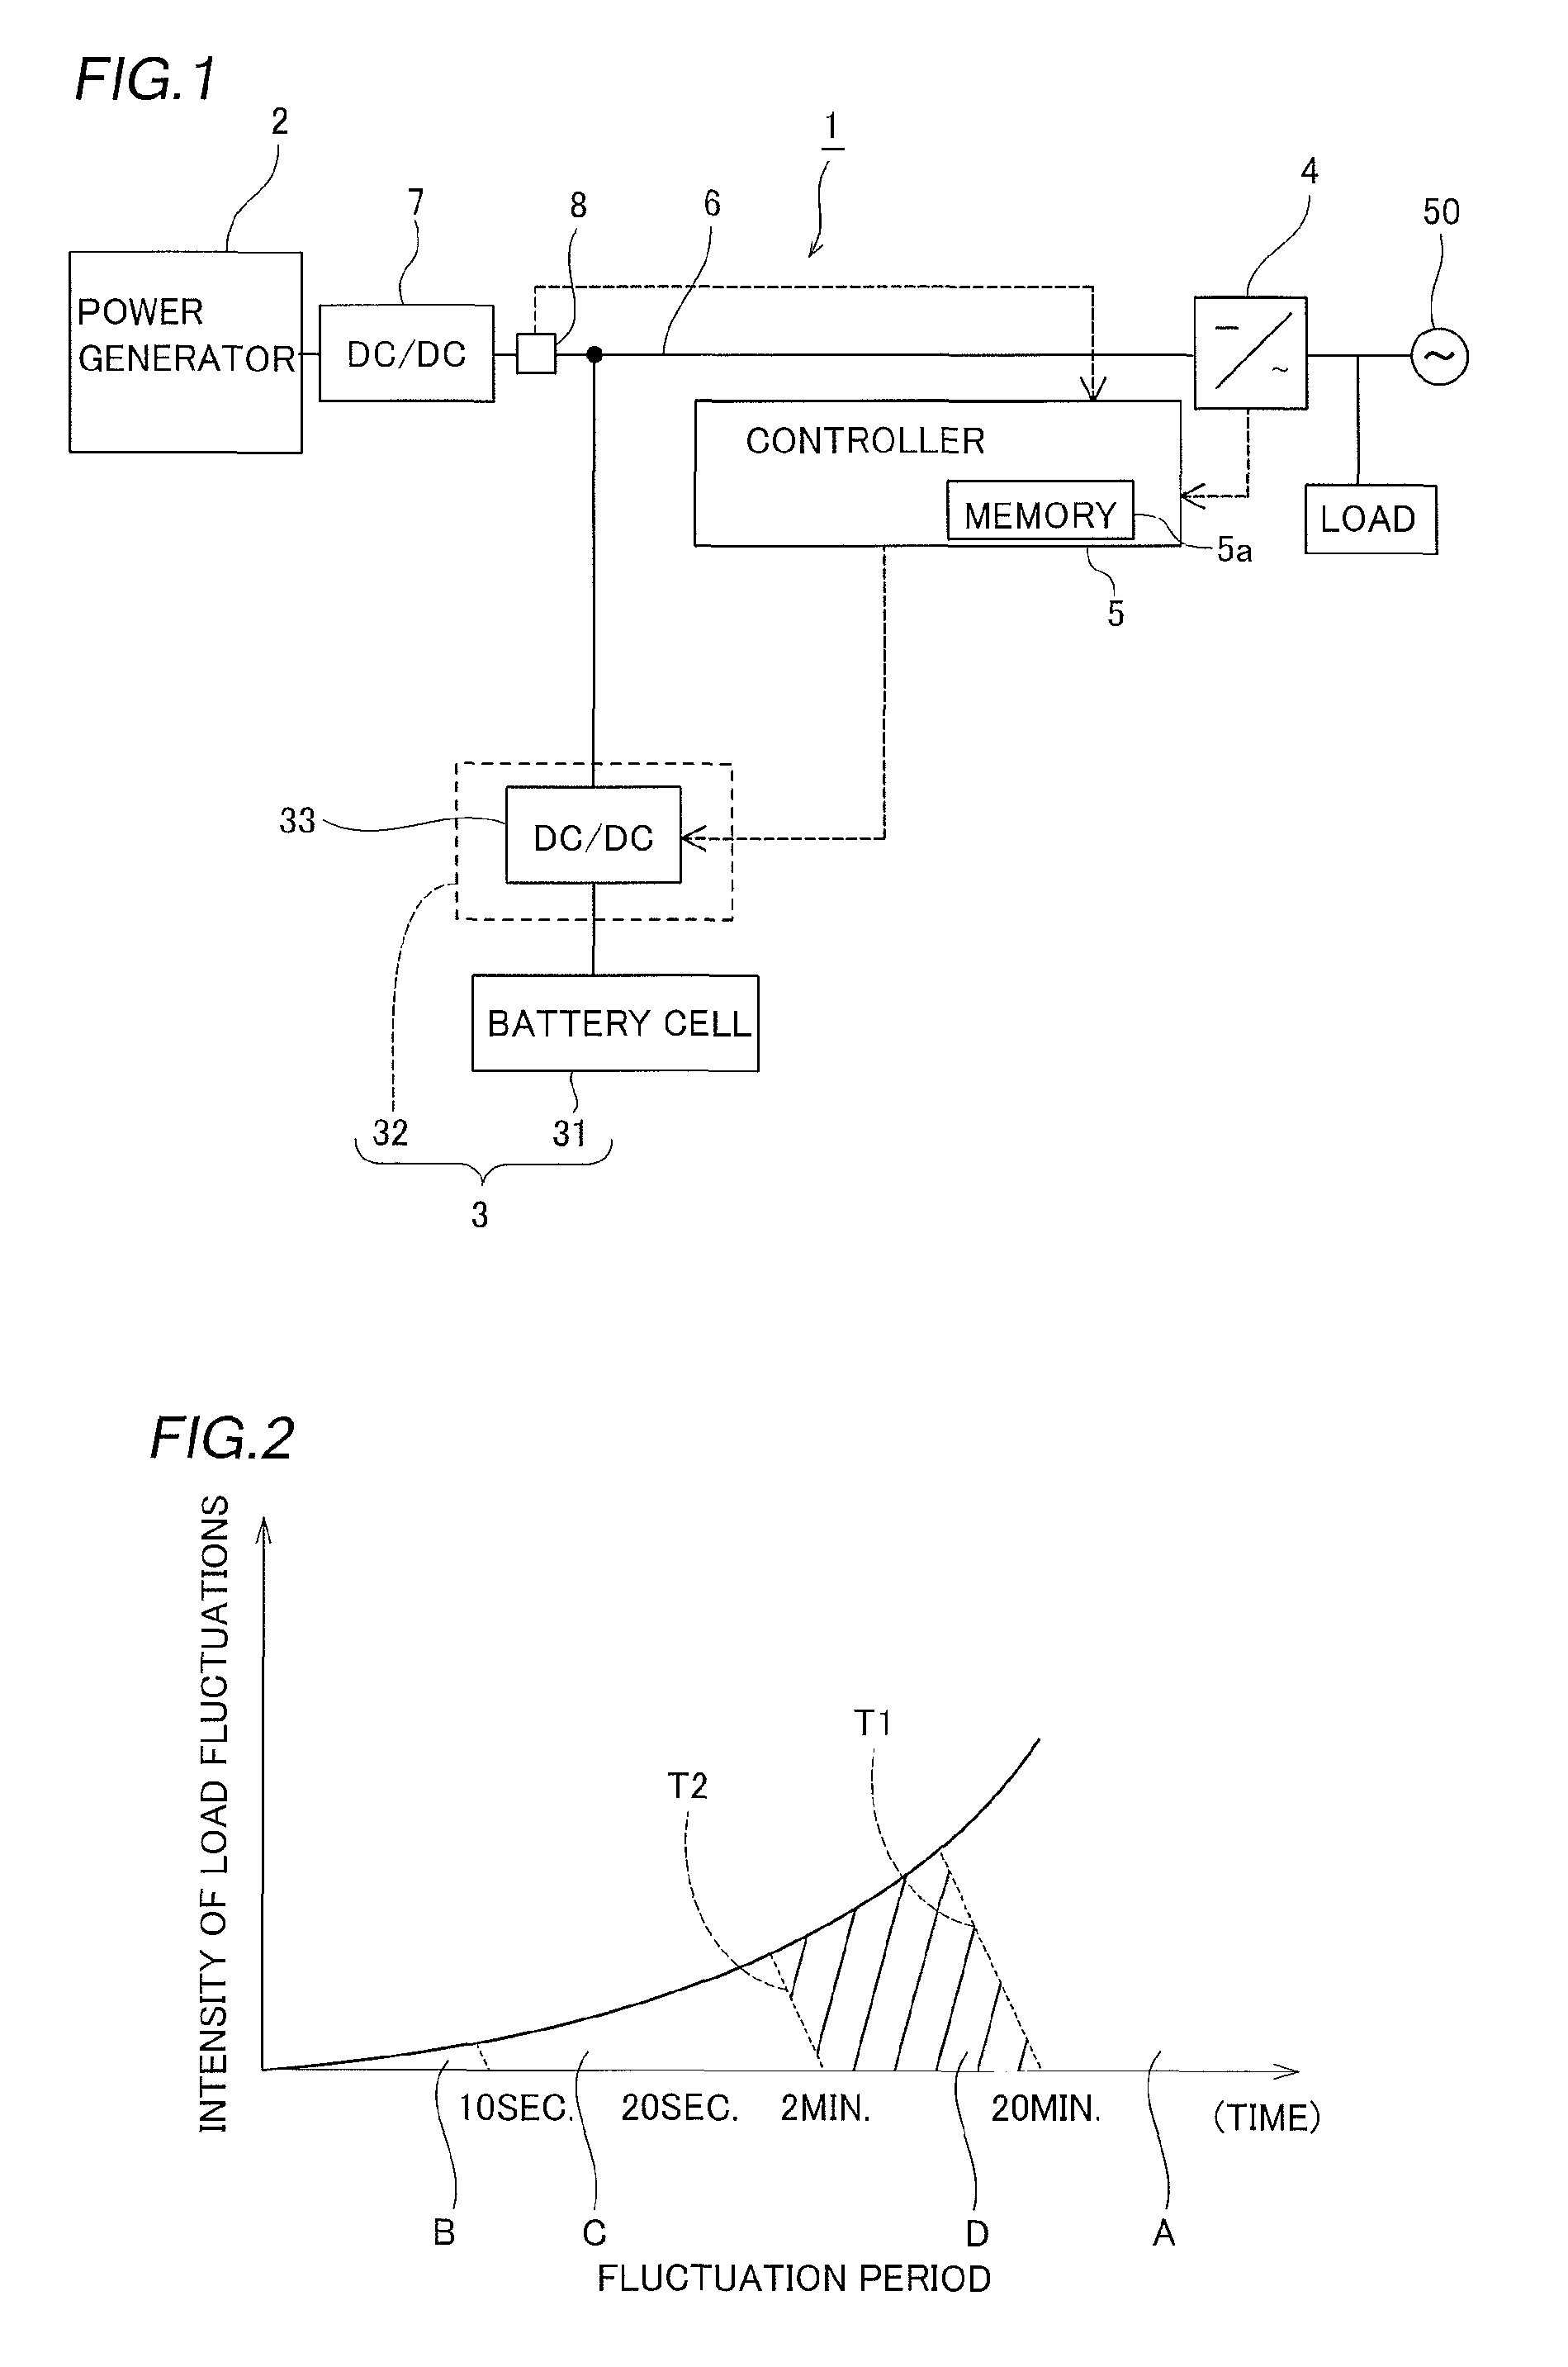 Method of controlling a battery, computer readable recording medium, electric power generation system and device controlling a battery